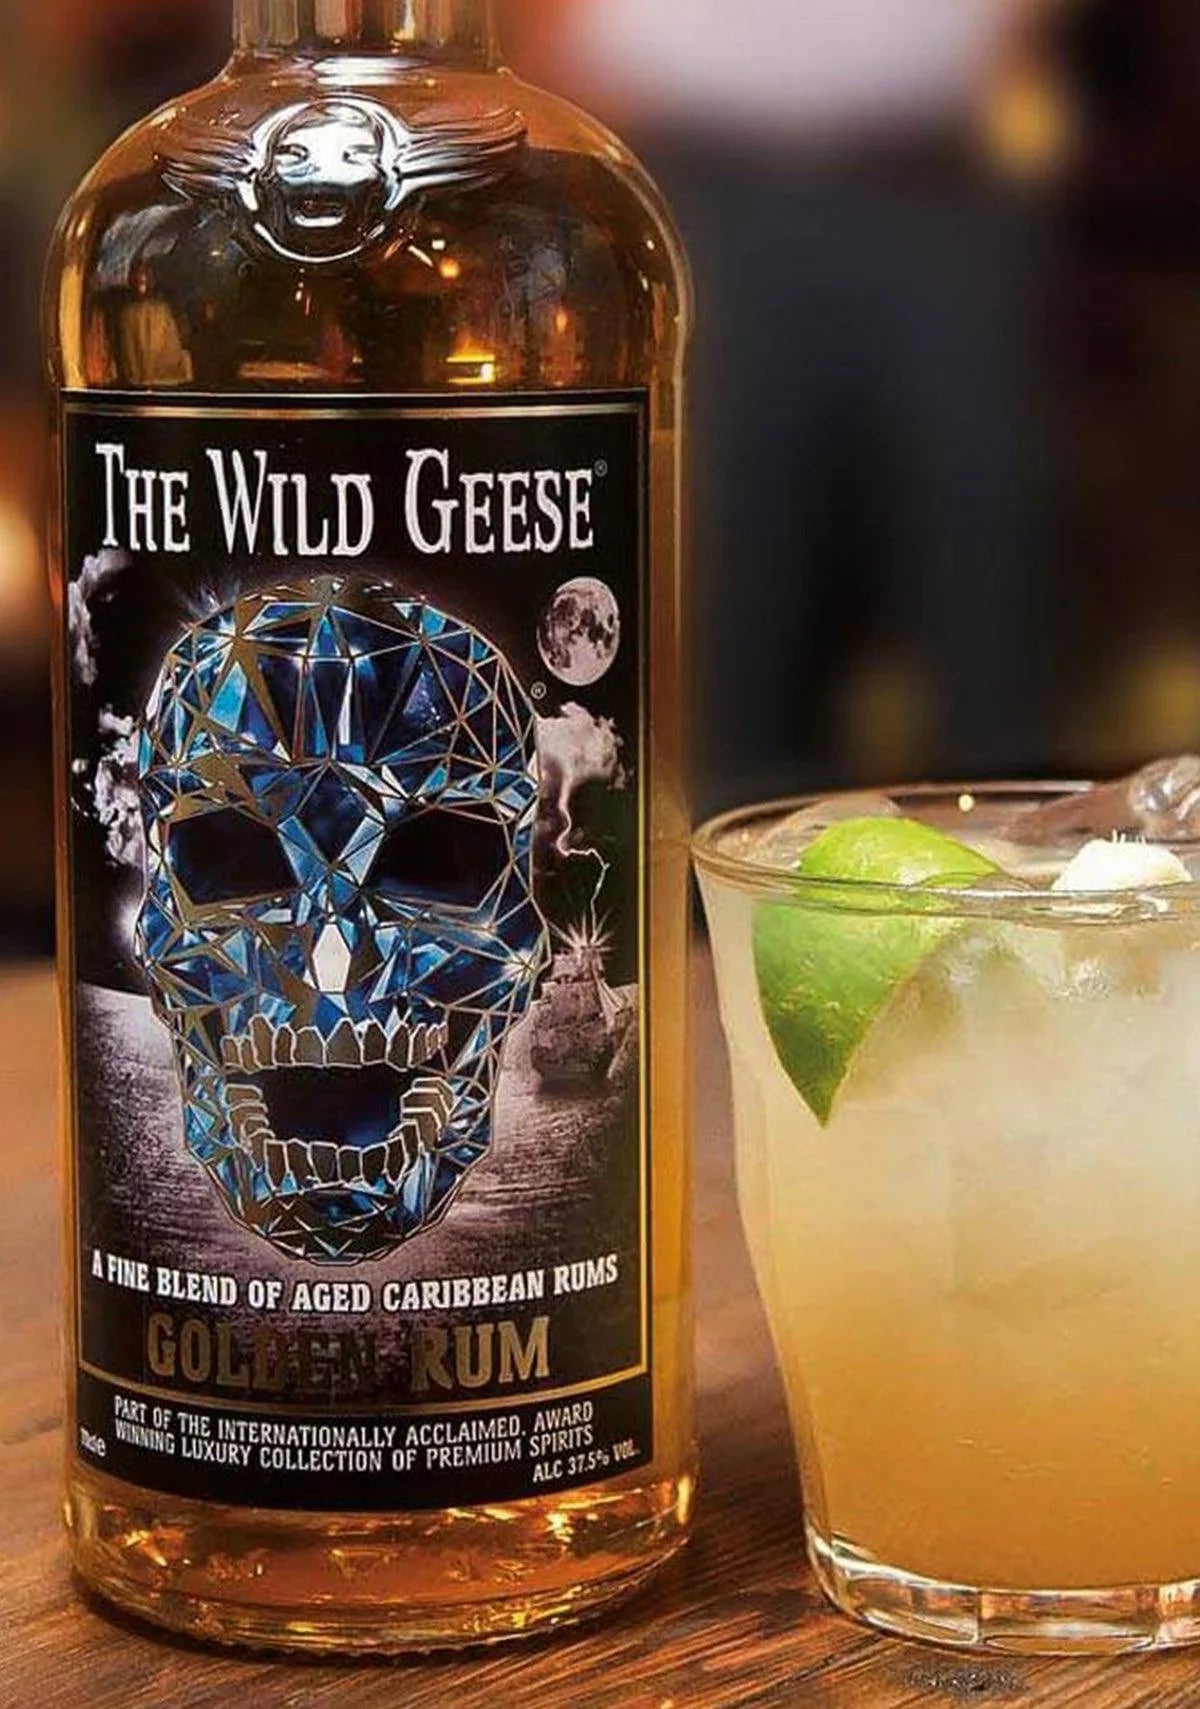 The Wild Geese Golden Rum + FREE Glass Tumbler